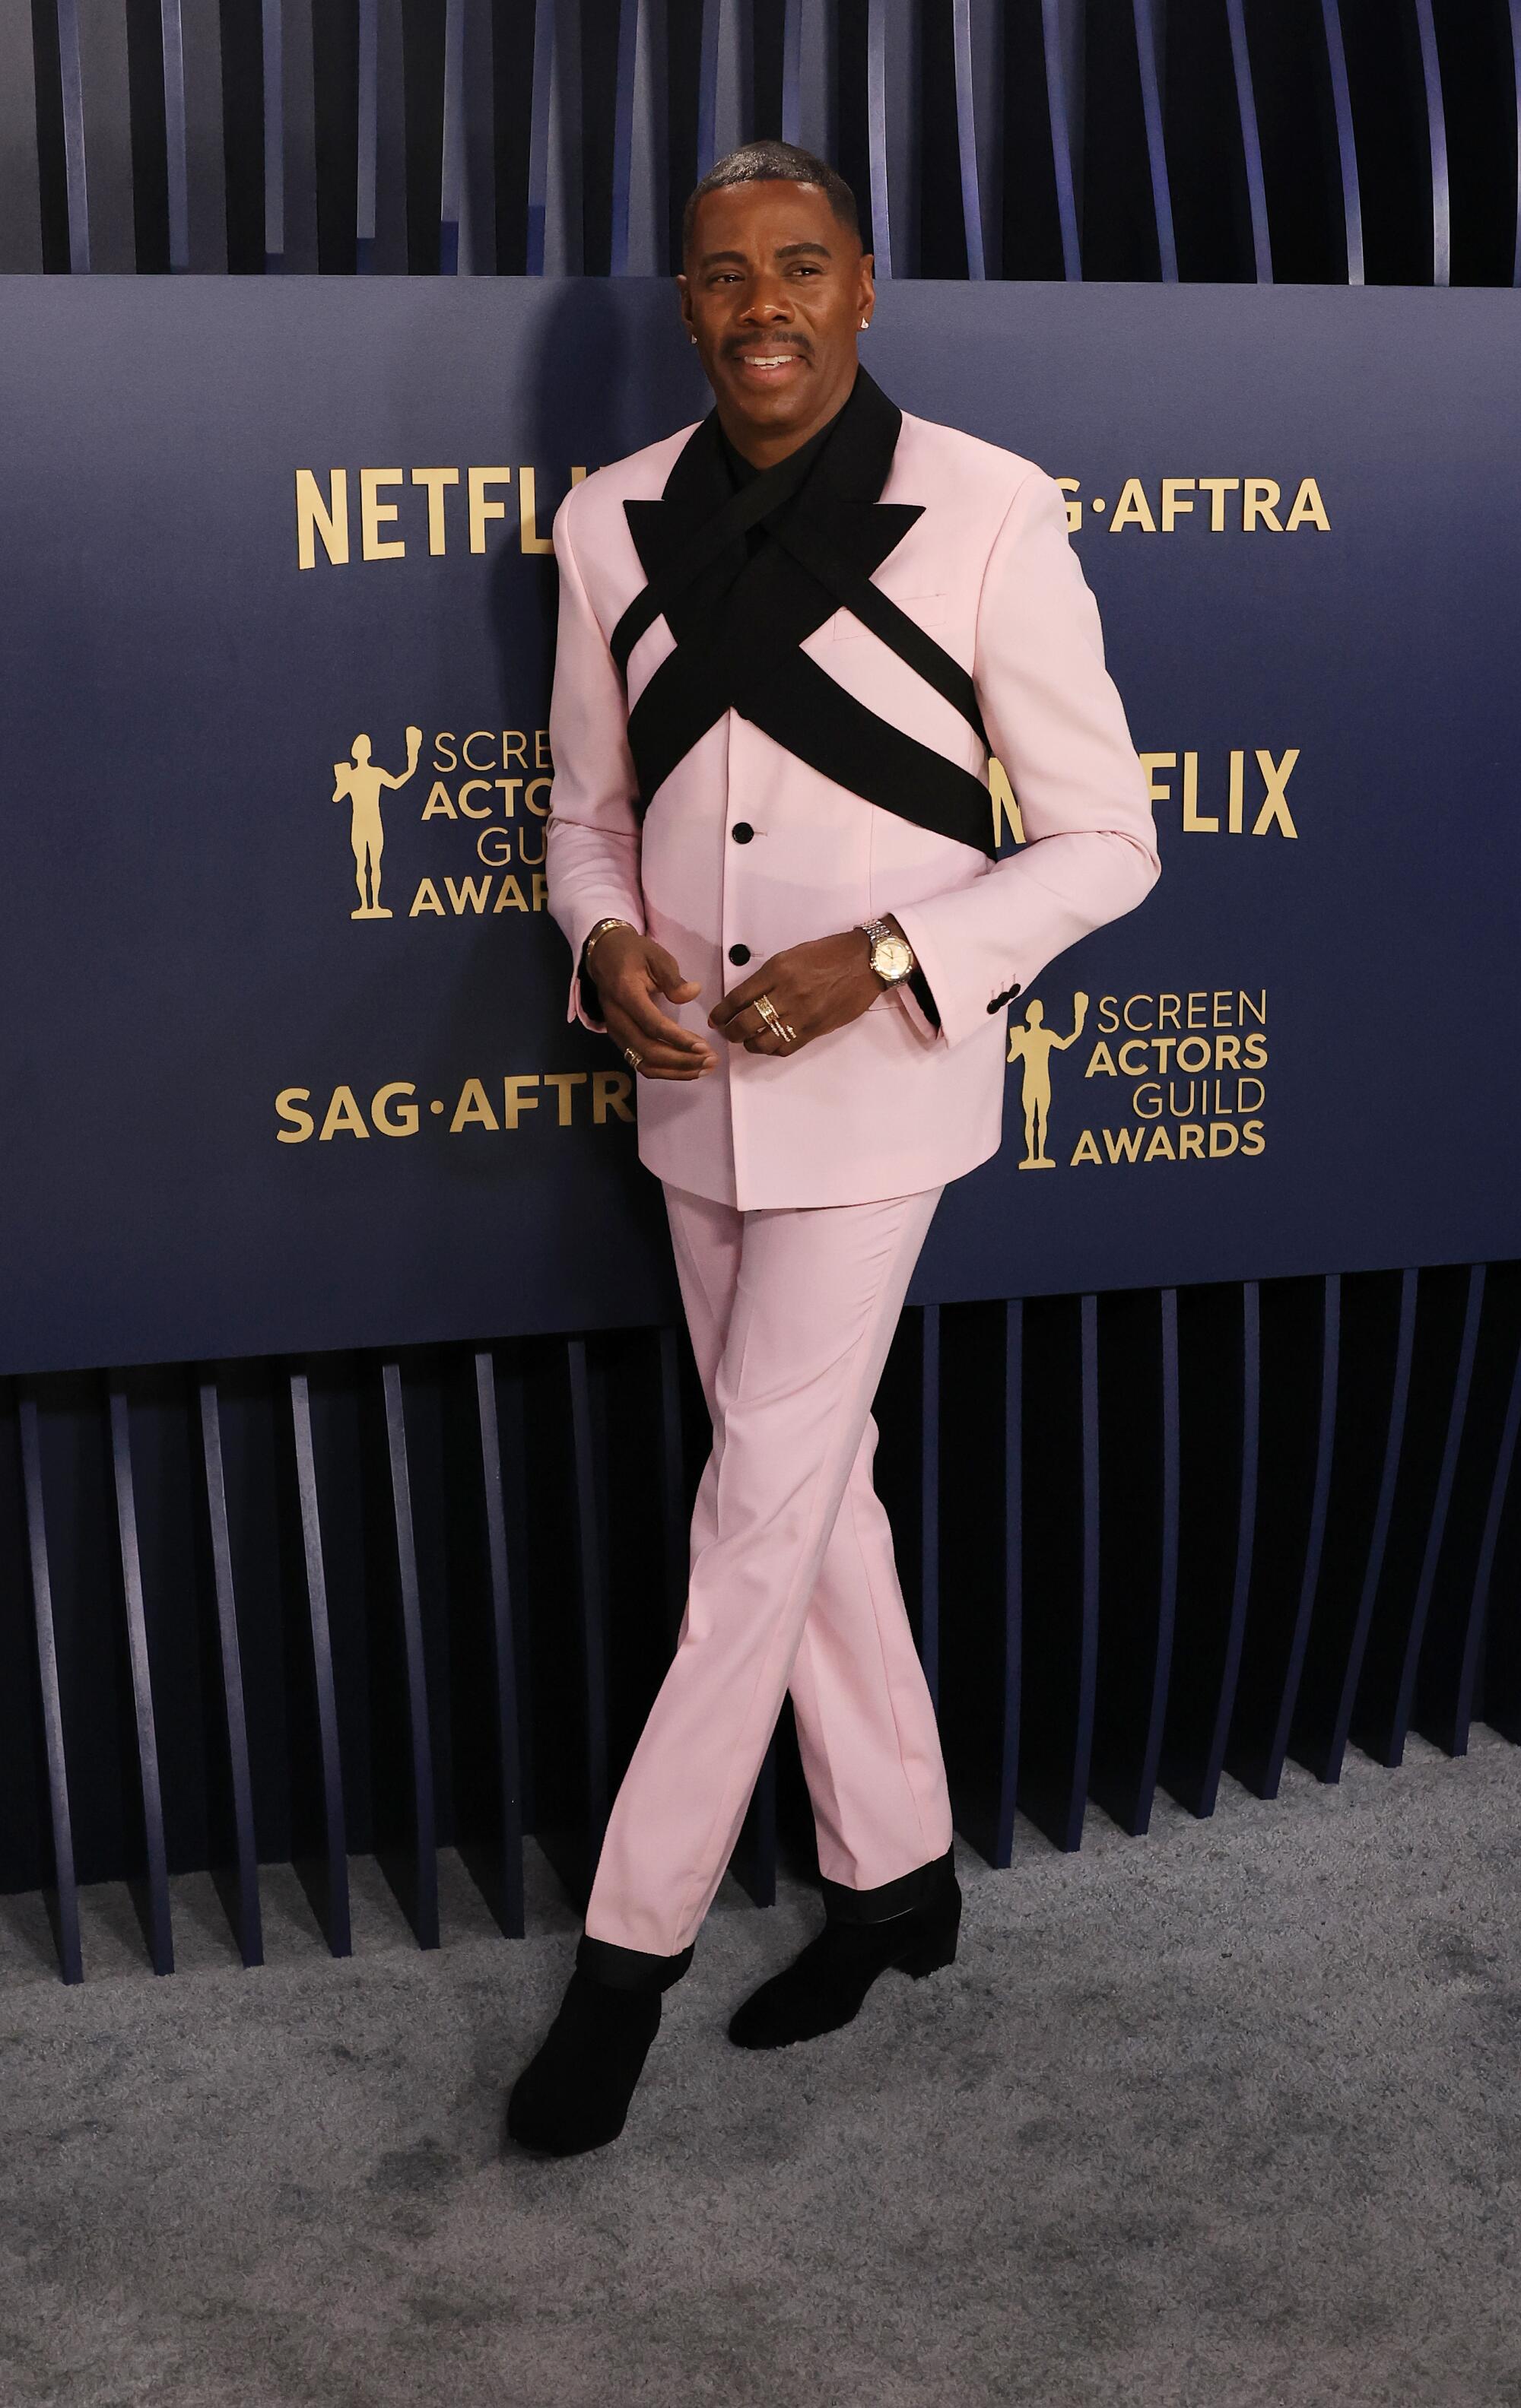 Colman Domingo wears a pink suit at the SAG Awards.